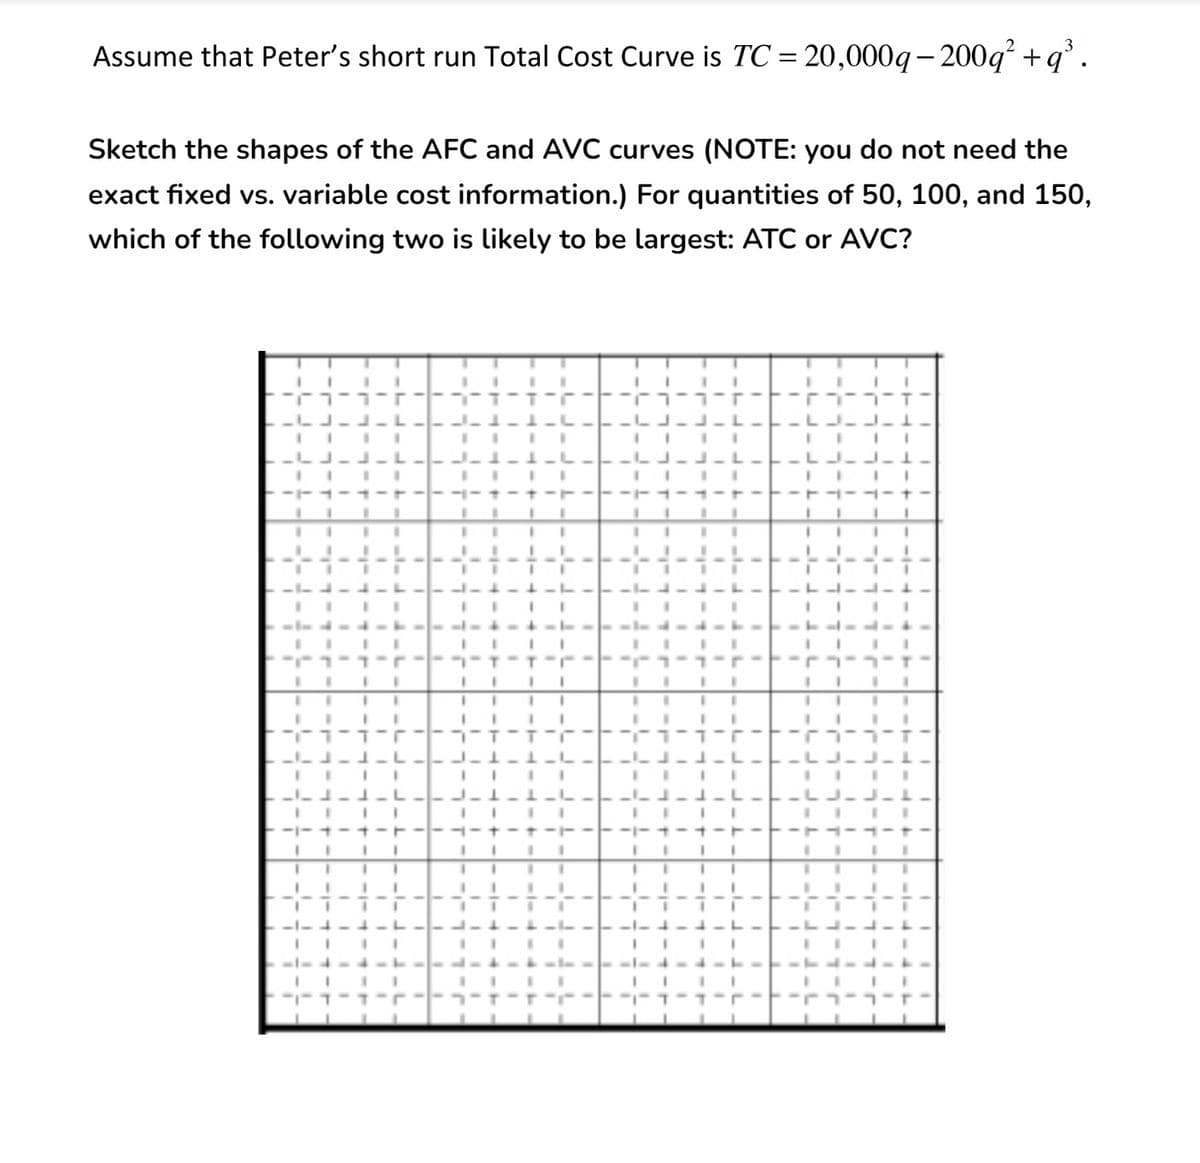 Assume that Peter's short run Total Cost Curve is TC = 20,000q- 200q +q°.
%3D
Sketch the shapes of the AFC and AVC curves (NOTE: you do not need the
exact fixed vs. variable cost information.) For quantities of 50, 100, and 150,
which of the following two is likely to be largest: ATC or AVC?
F T-
-LJ---L---- 1 -1.L-- - --L.
IIII
IIII
-LJ-J-L-
IIII
1---
--+-+ -
3D
%3D
---
ת- ד- דדוT
ד - רדו
-1-L--J-1 -1-L.
-1 L-E-LJ-J-1.
IIII
--1-1-L--J- 1 -1-L-- --L-E-LJ-J-1-
IIII
+-+---- -+ -+---
-- 1-+ -
-I-4-4
-LL- -L
r-ר -ר
